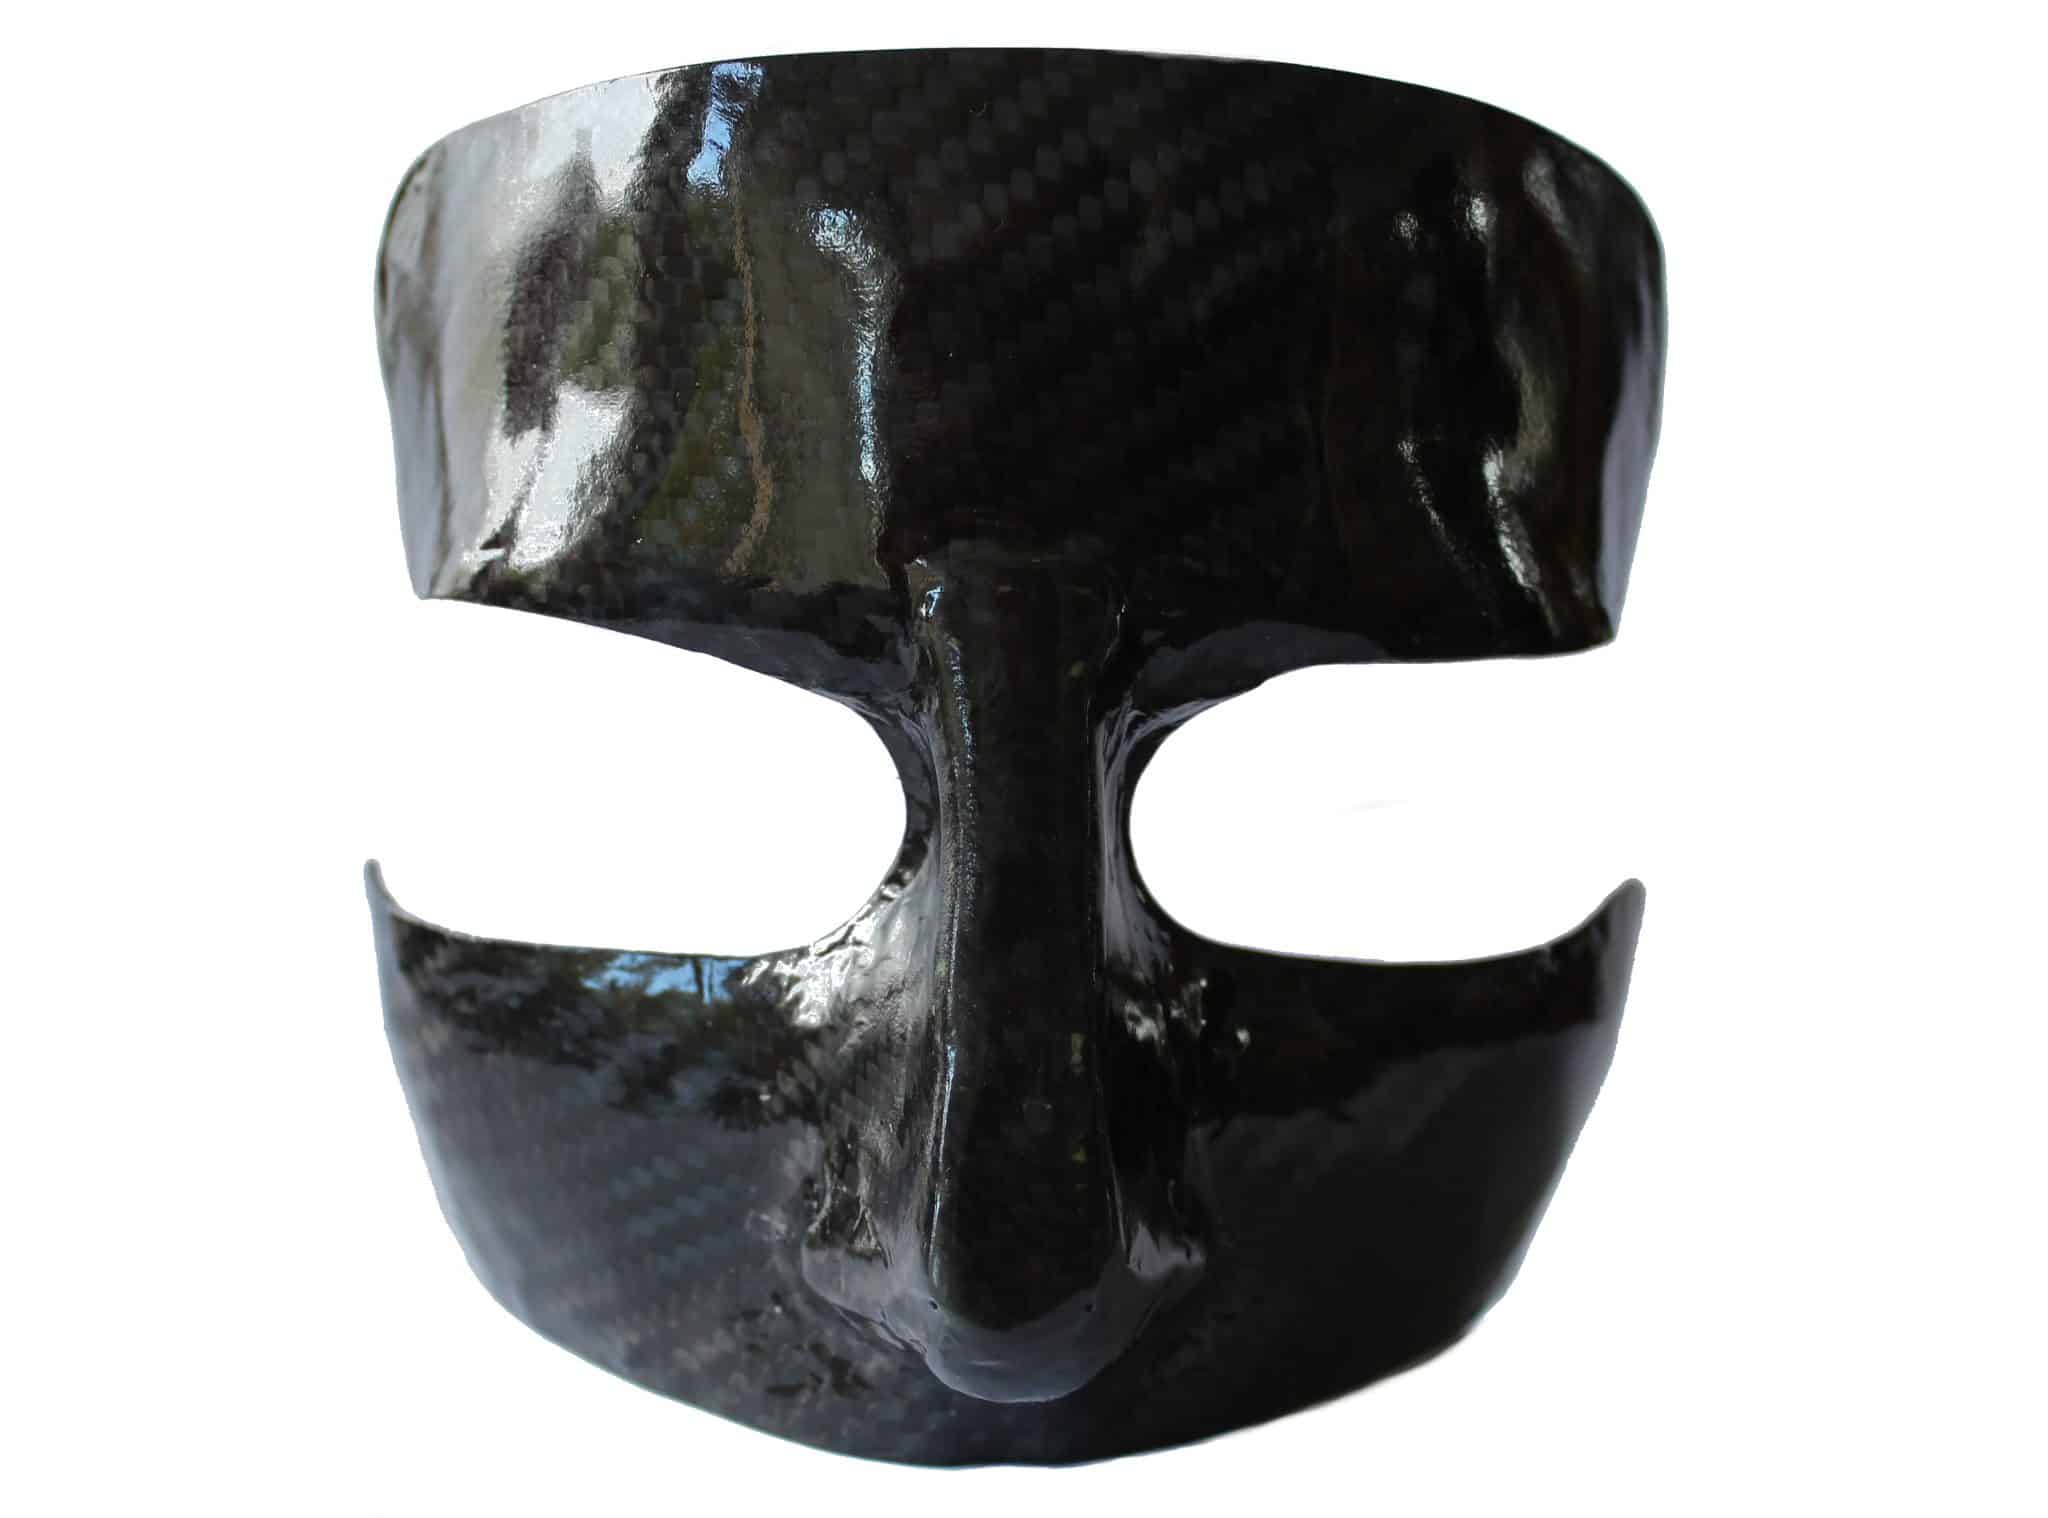 carbon fibre facemask front on showing nose - protect your marketing assets